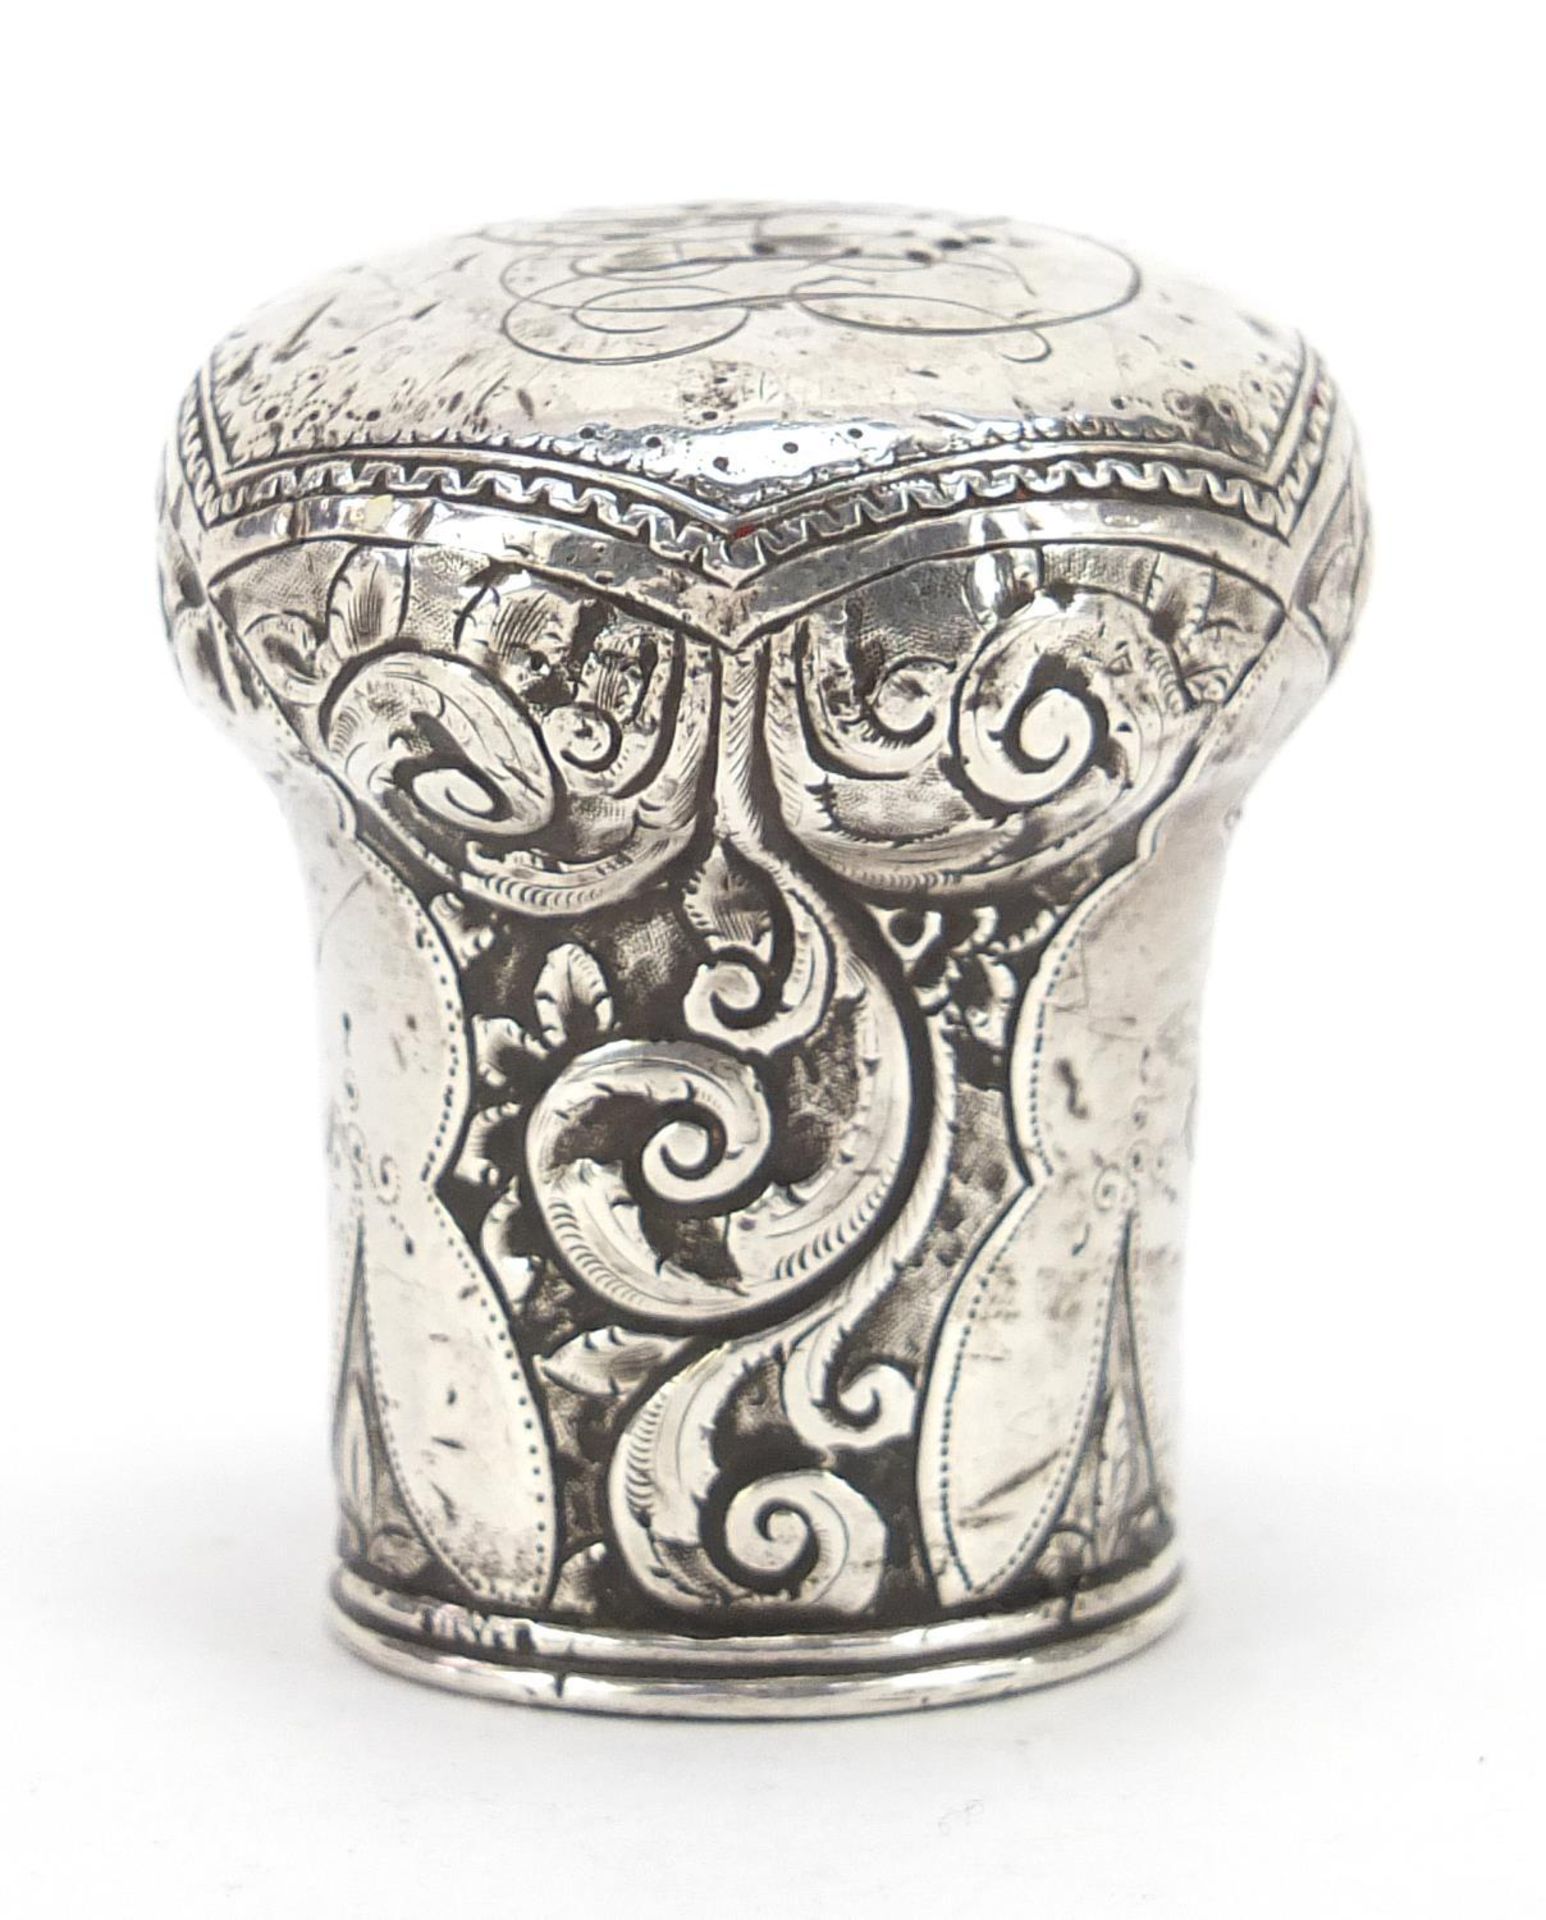 Sterling silver walking cane handle with engraved decoration, 5cm high, 214.0g : - Image 2 of 5